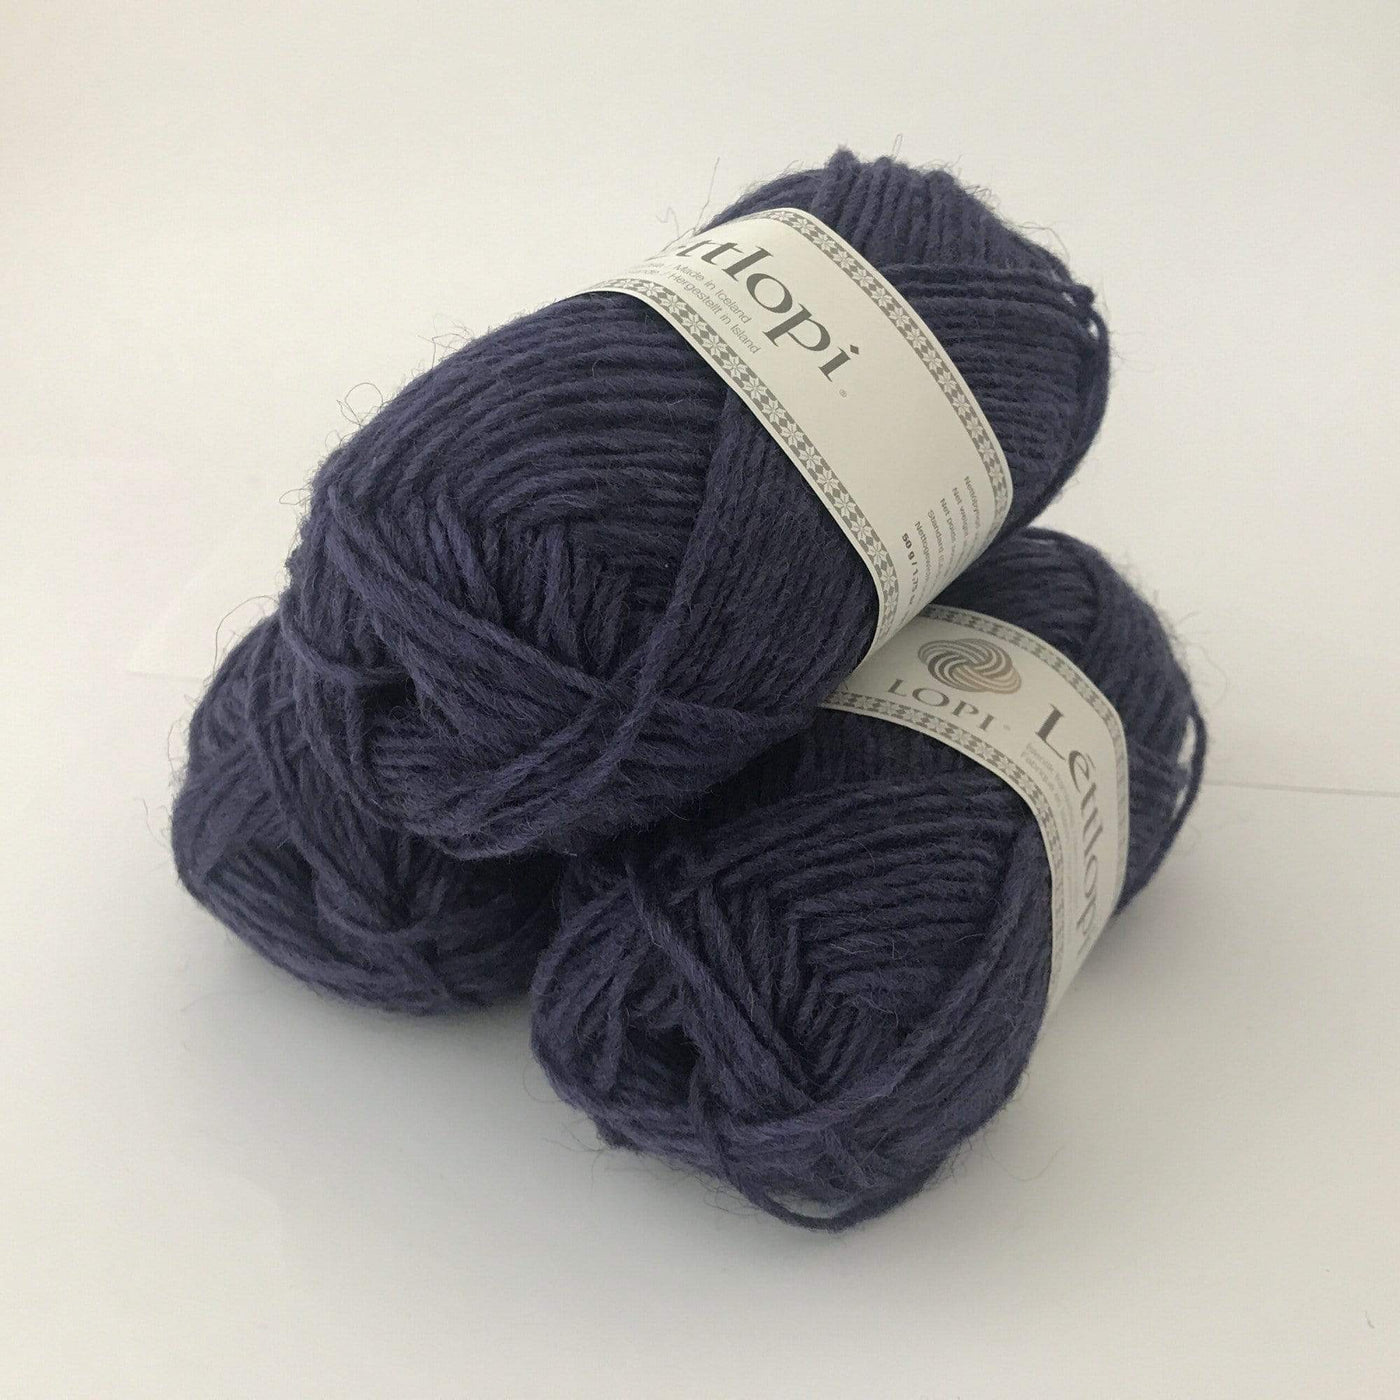 Ball of Lettlopi in colorway 9432 - grape heather.